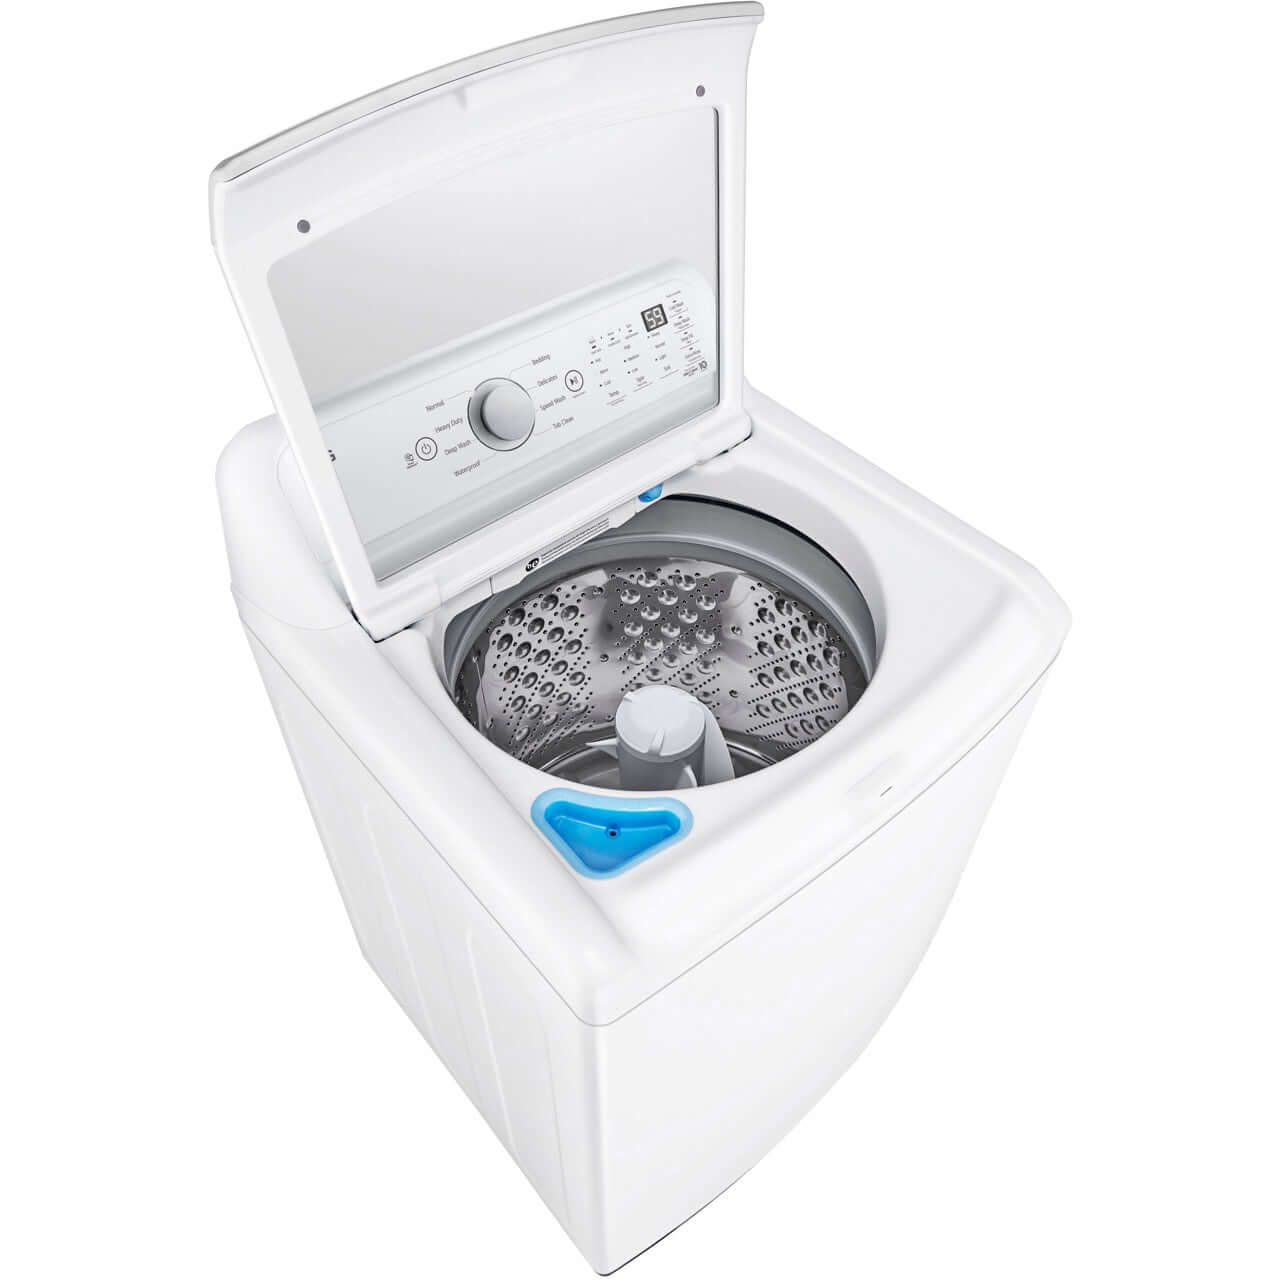 LG 4.8-Cu. Ft. Mega Capacity Top Load Washer with 4-Way Agitator and TurboDrum Technology (WT7155CW)